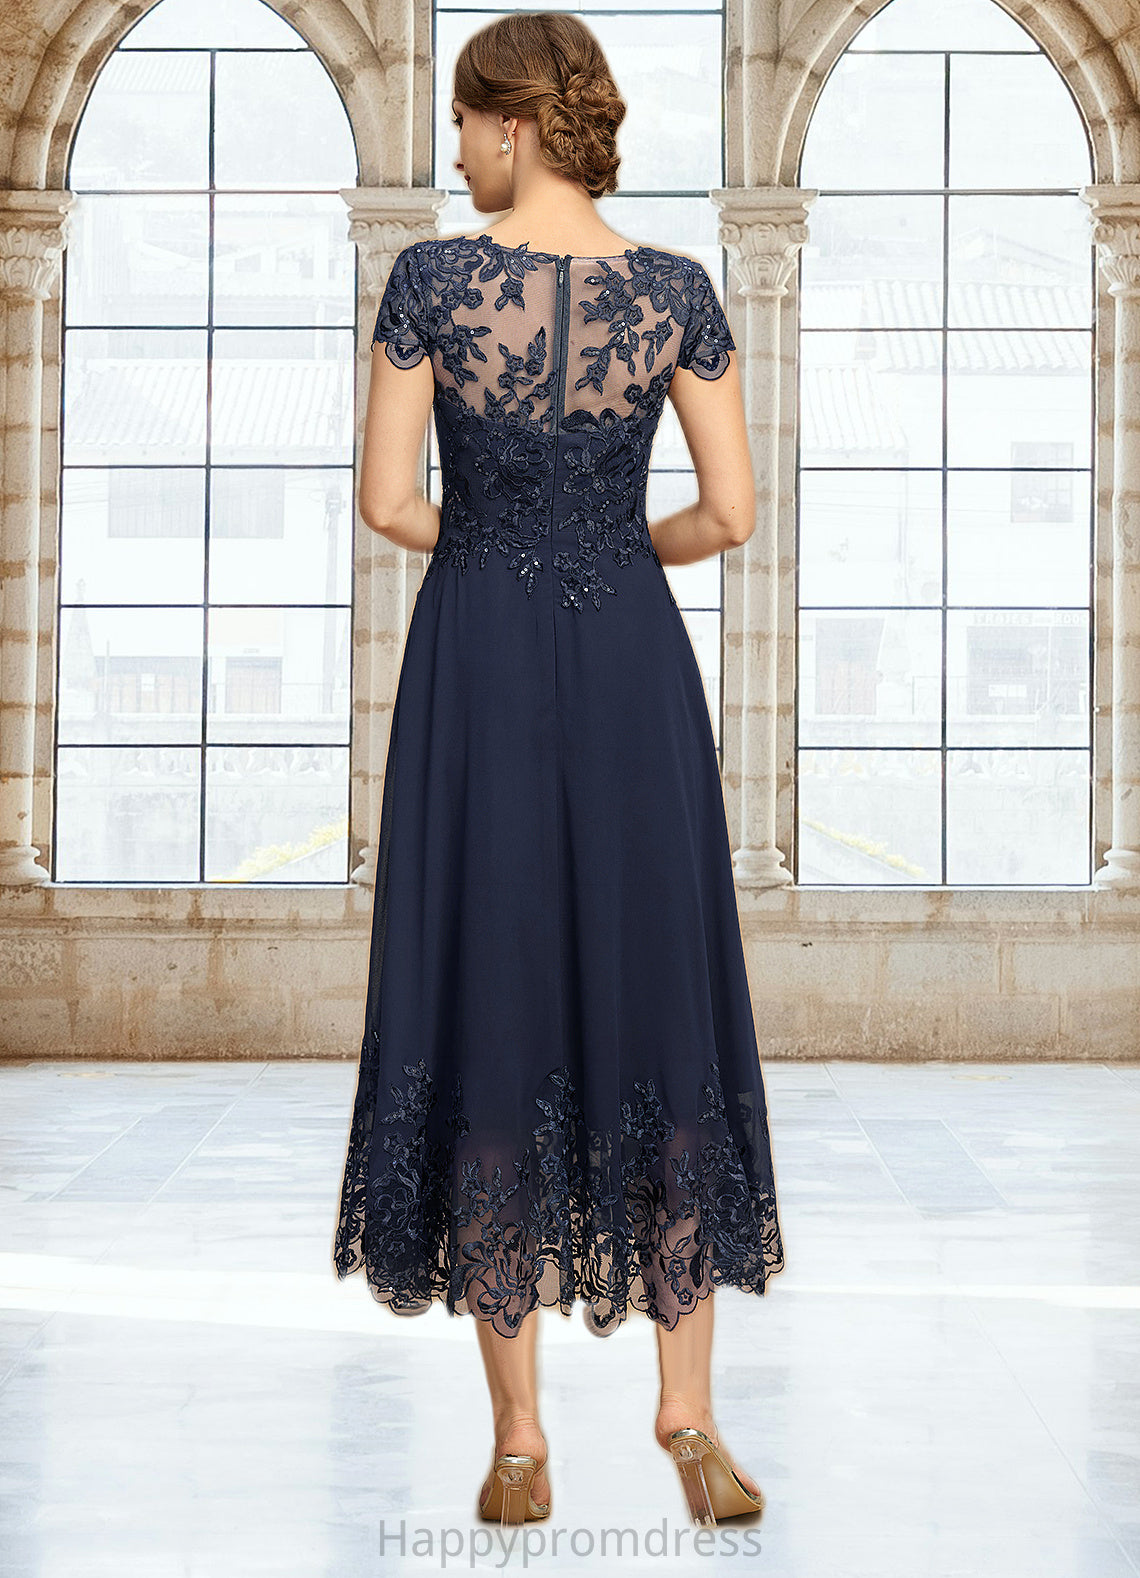 Chloe A-line Scoop Illusion Tea-Length Chiffon Lace Mother of the Bride Dress With Sequins XXSP0021664